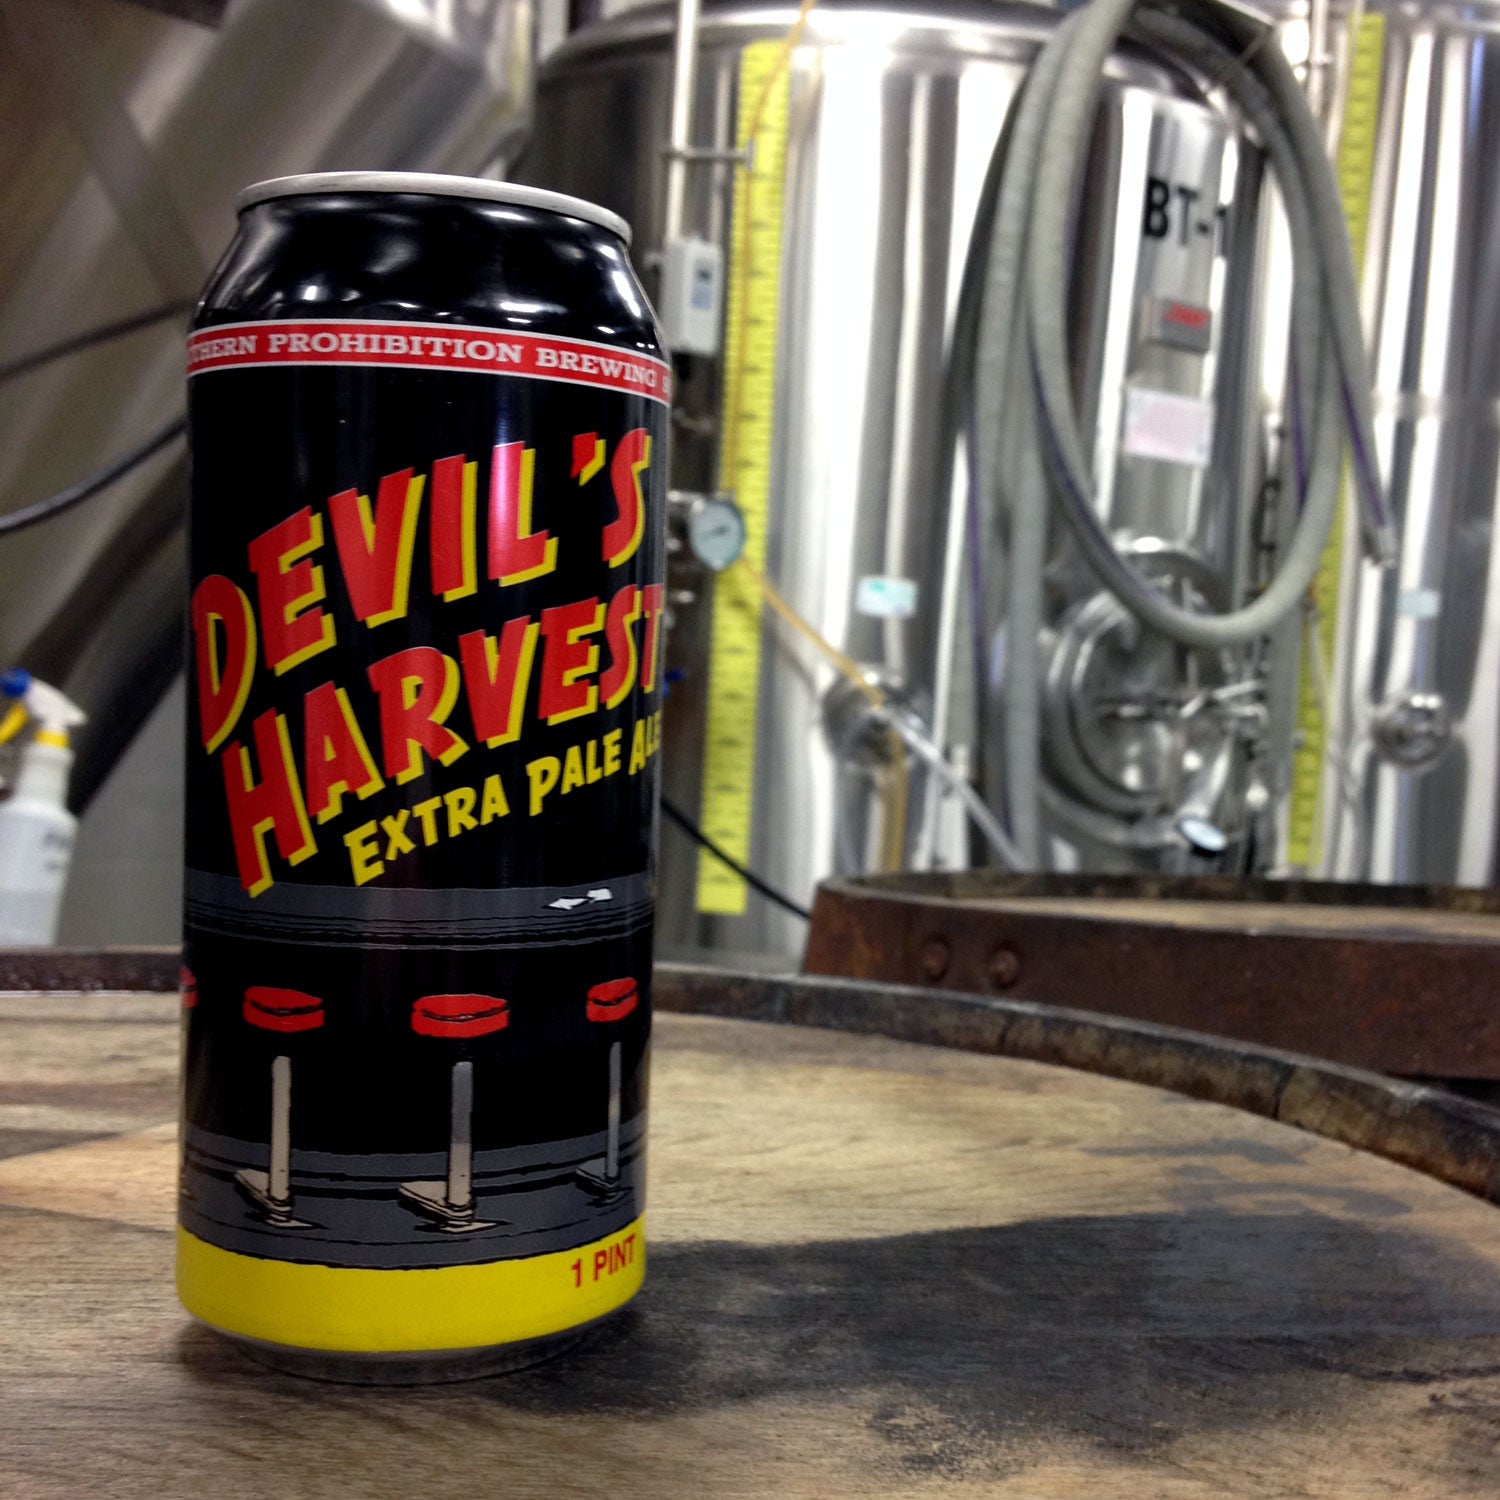 devils harvest extra pale ale southern prohibition brewing outside canned beer spring mountain biking